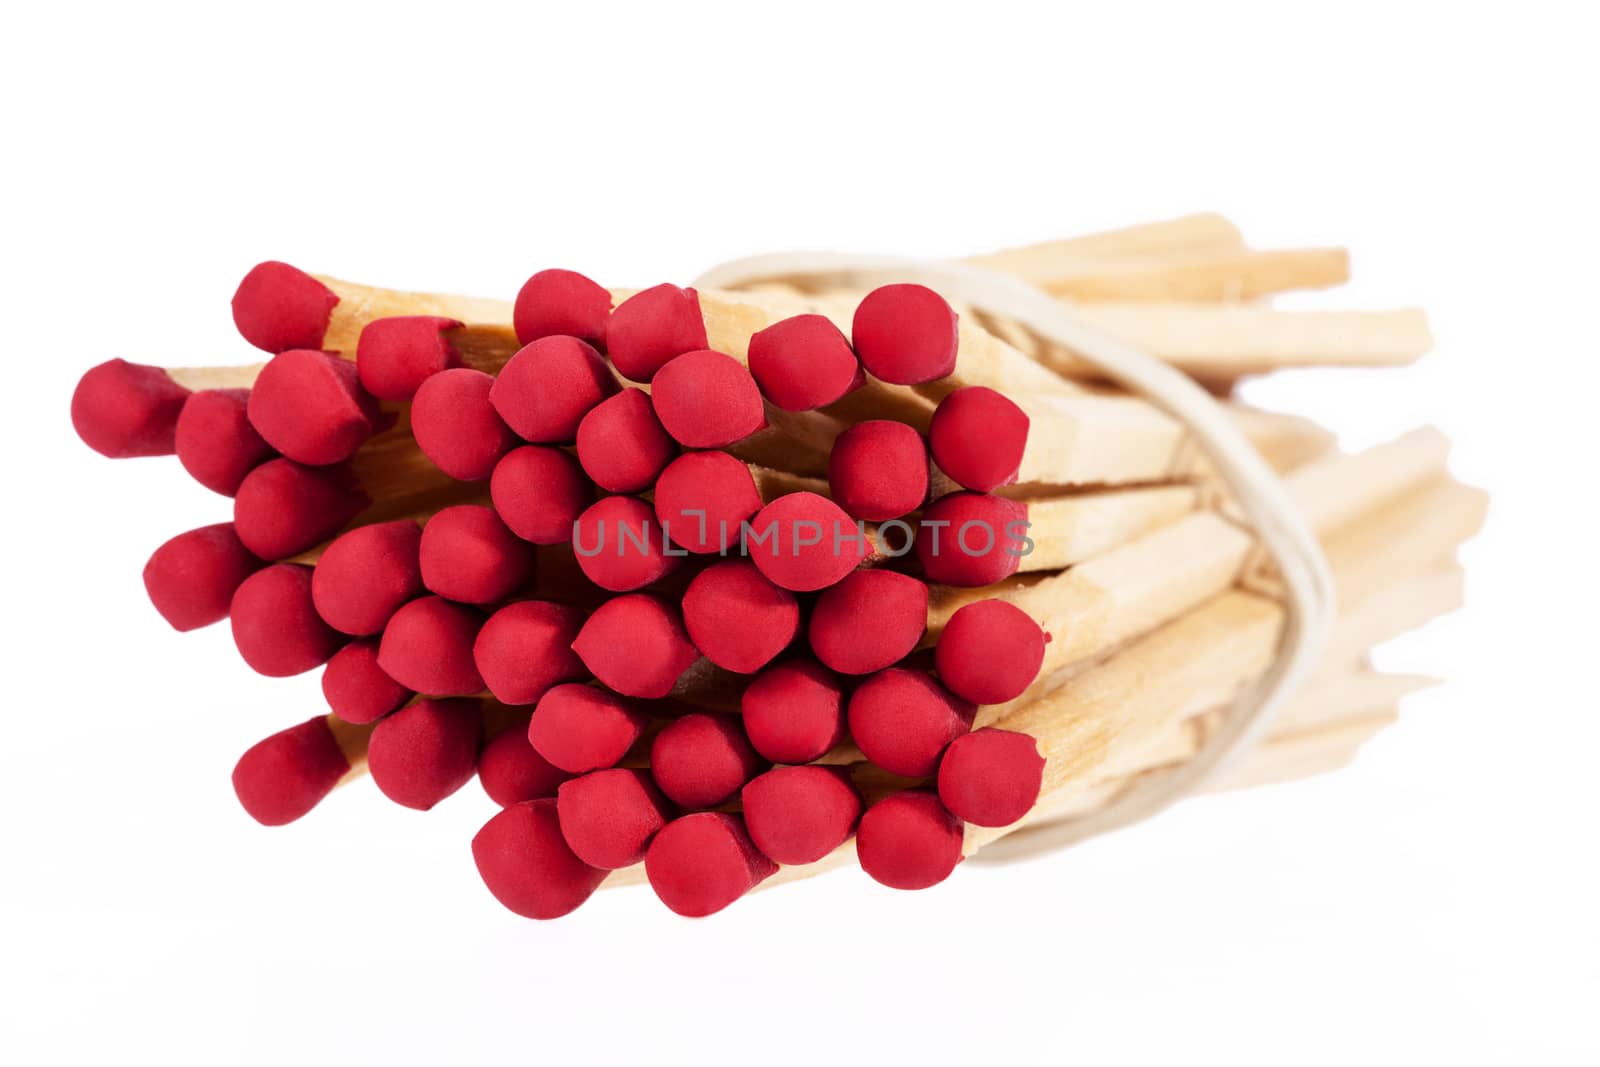 Heap of matches with rad heads isolated on white background, close up